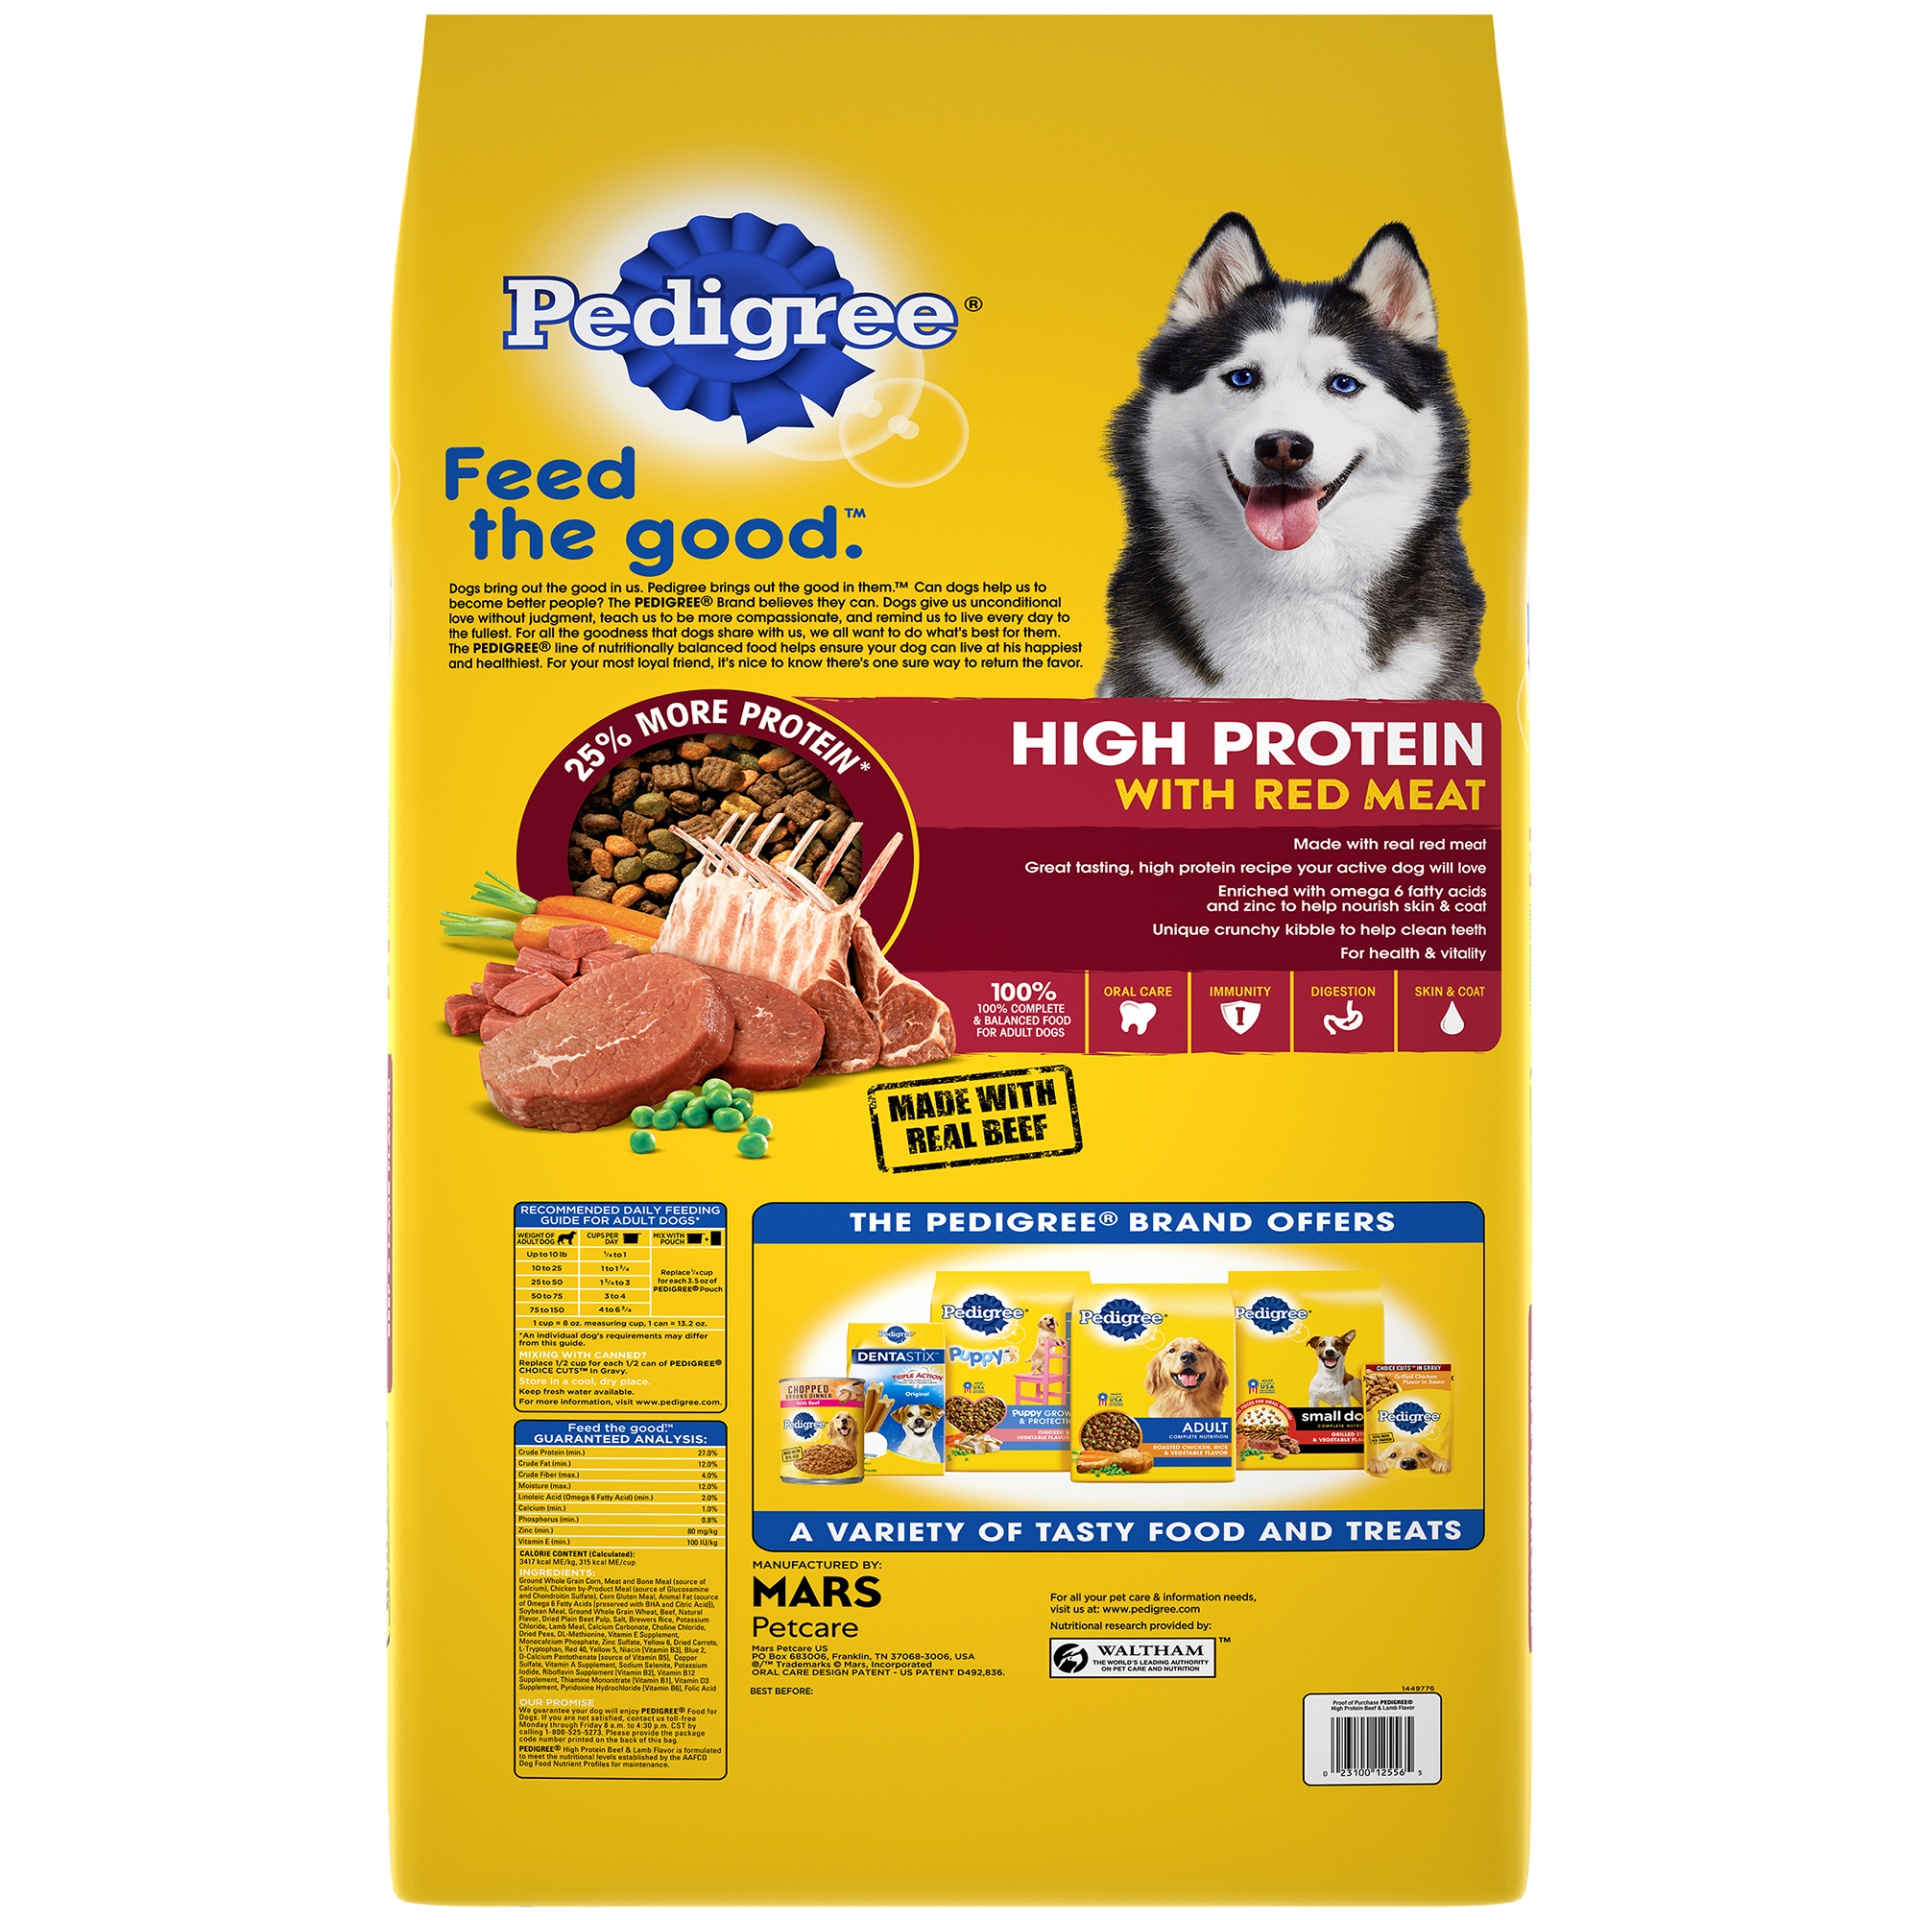 PEDIGREE High Protein Adult Dry Dog Food Beef and Lamb